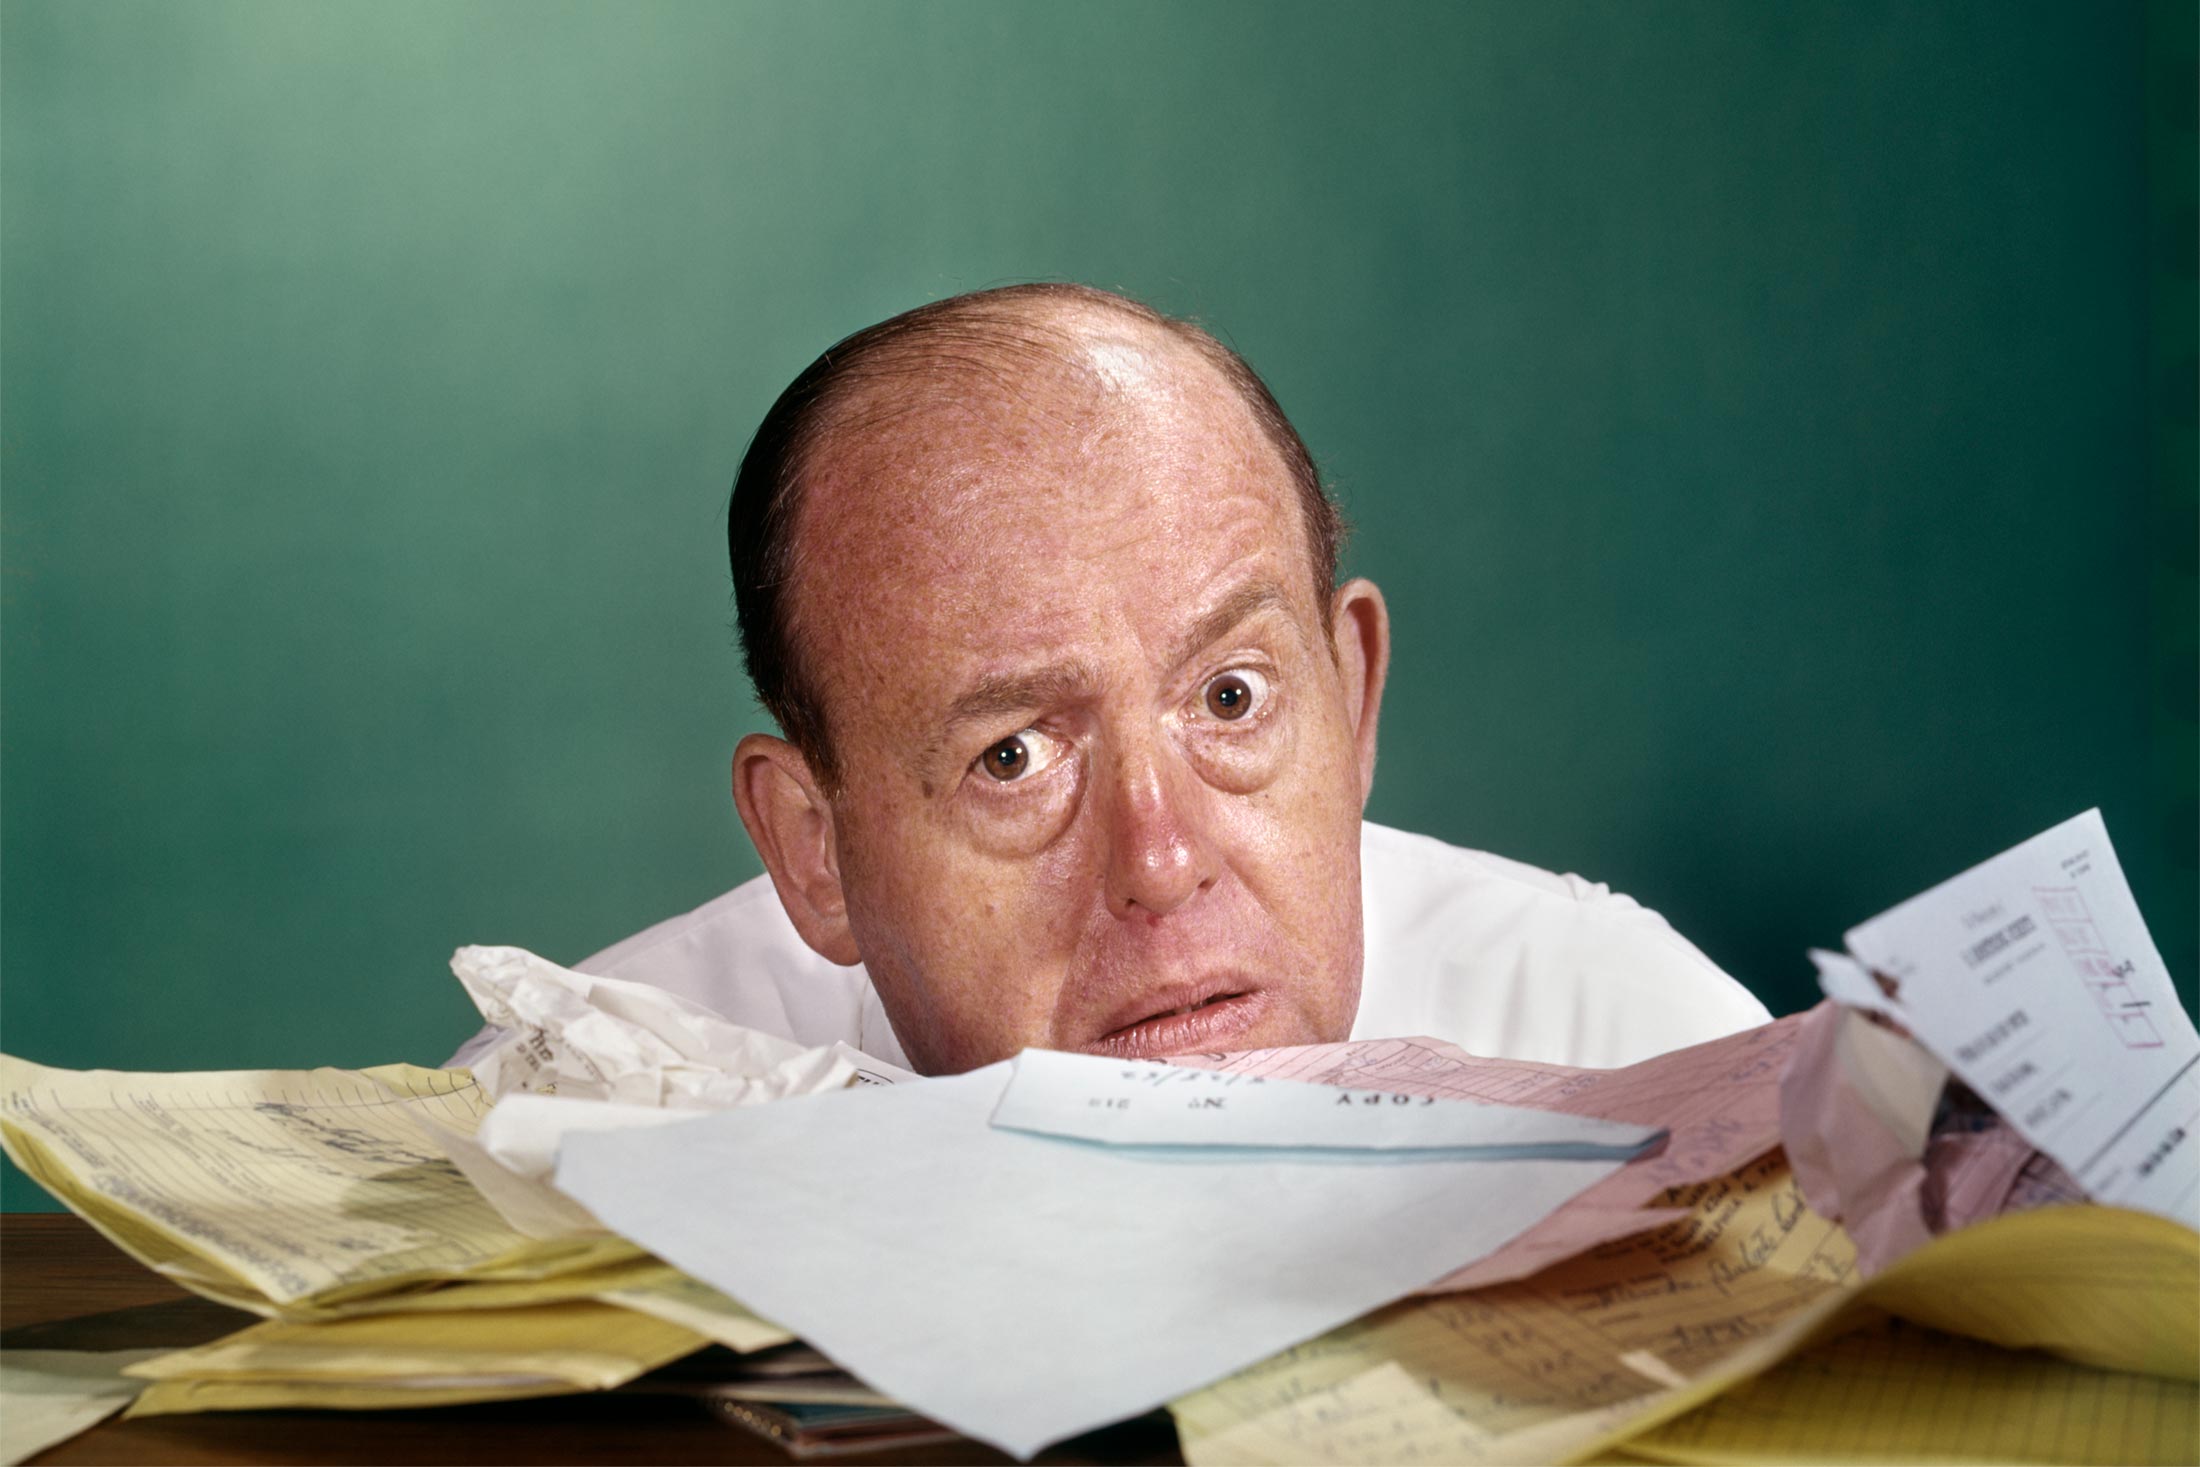 Image of a middle-aged man peering out from behind a large, messy stack of paperwork.